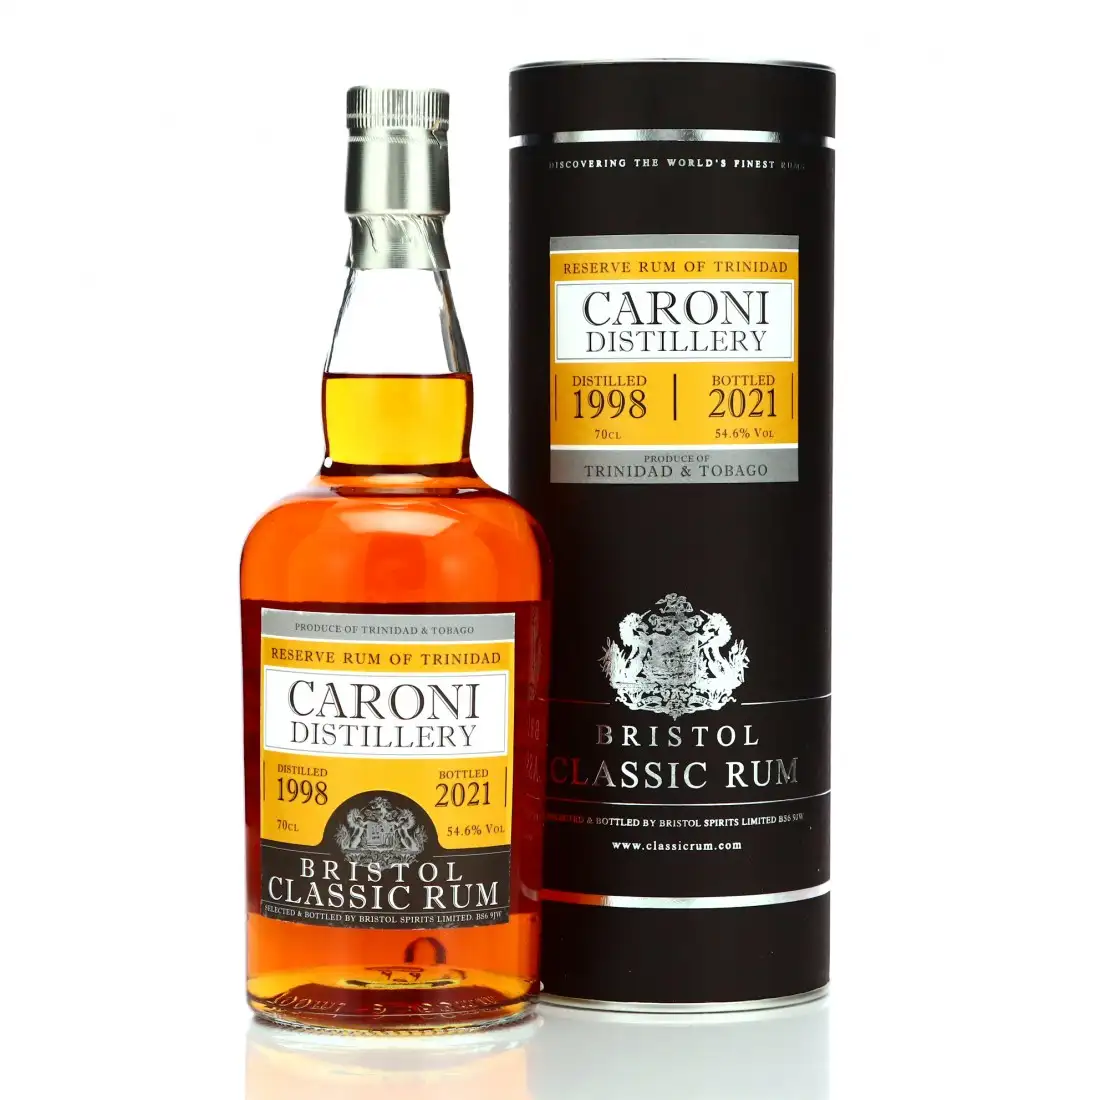 Image of the front of the bottle of the rum Caroni Distillery